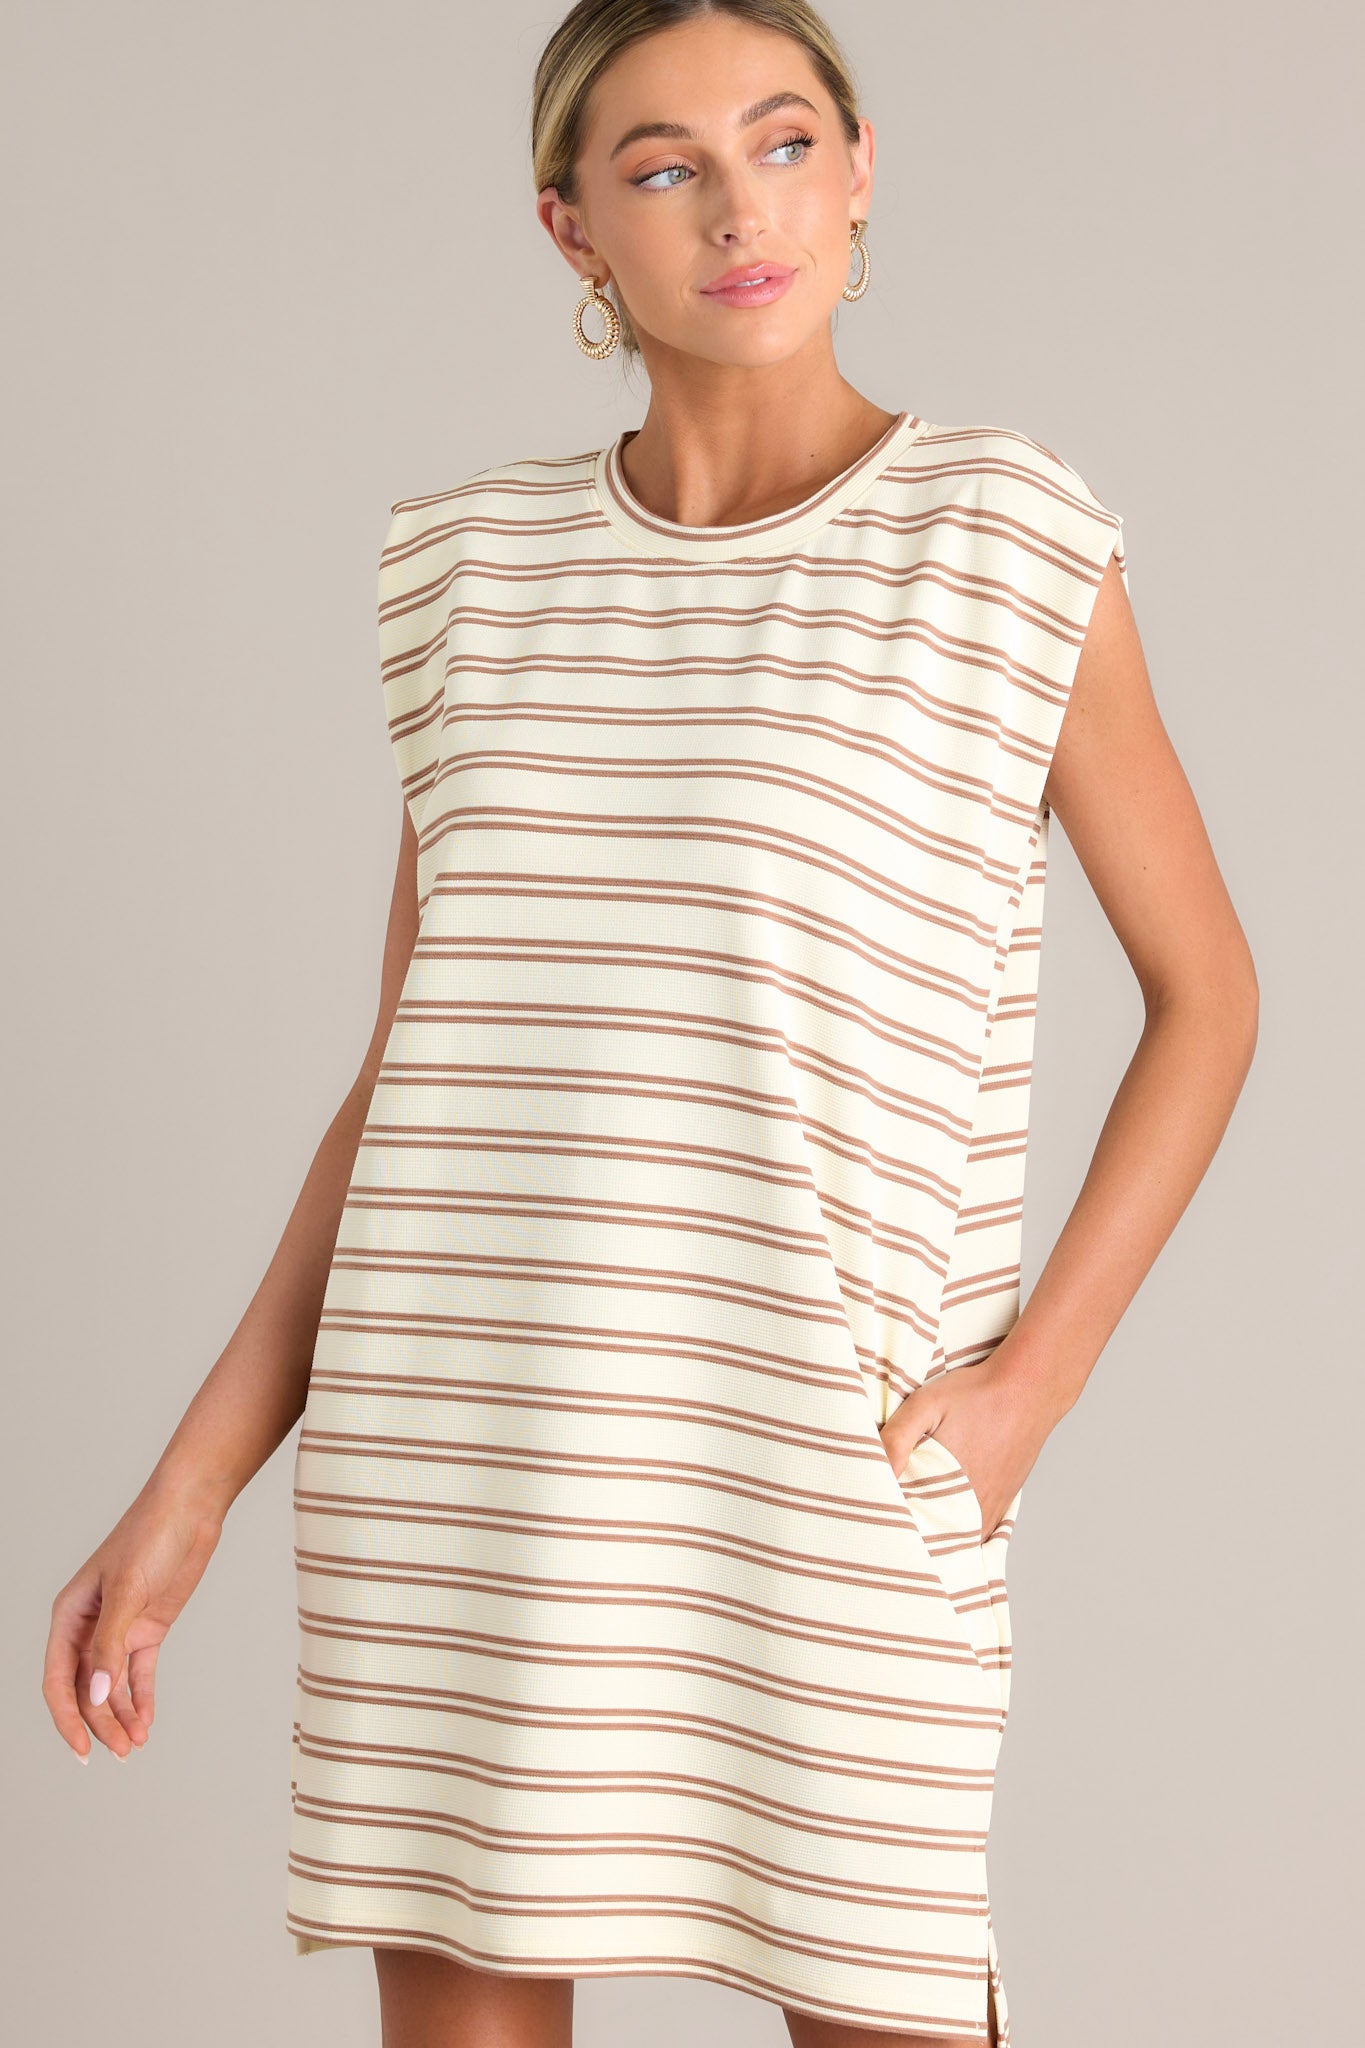 This stripe mini dress features a crew neckline, short cap sleeves, a double stripe pattern, functional hip pockets, and a split hemline.